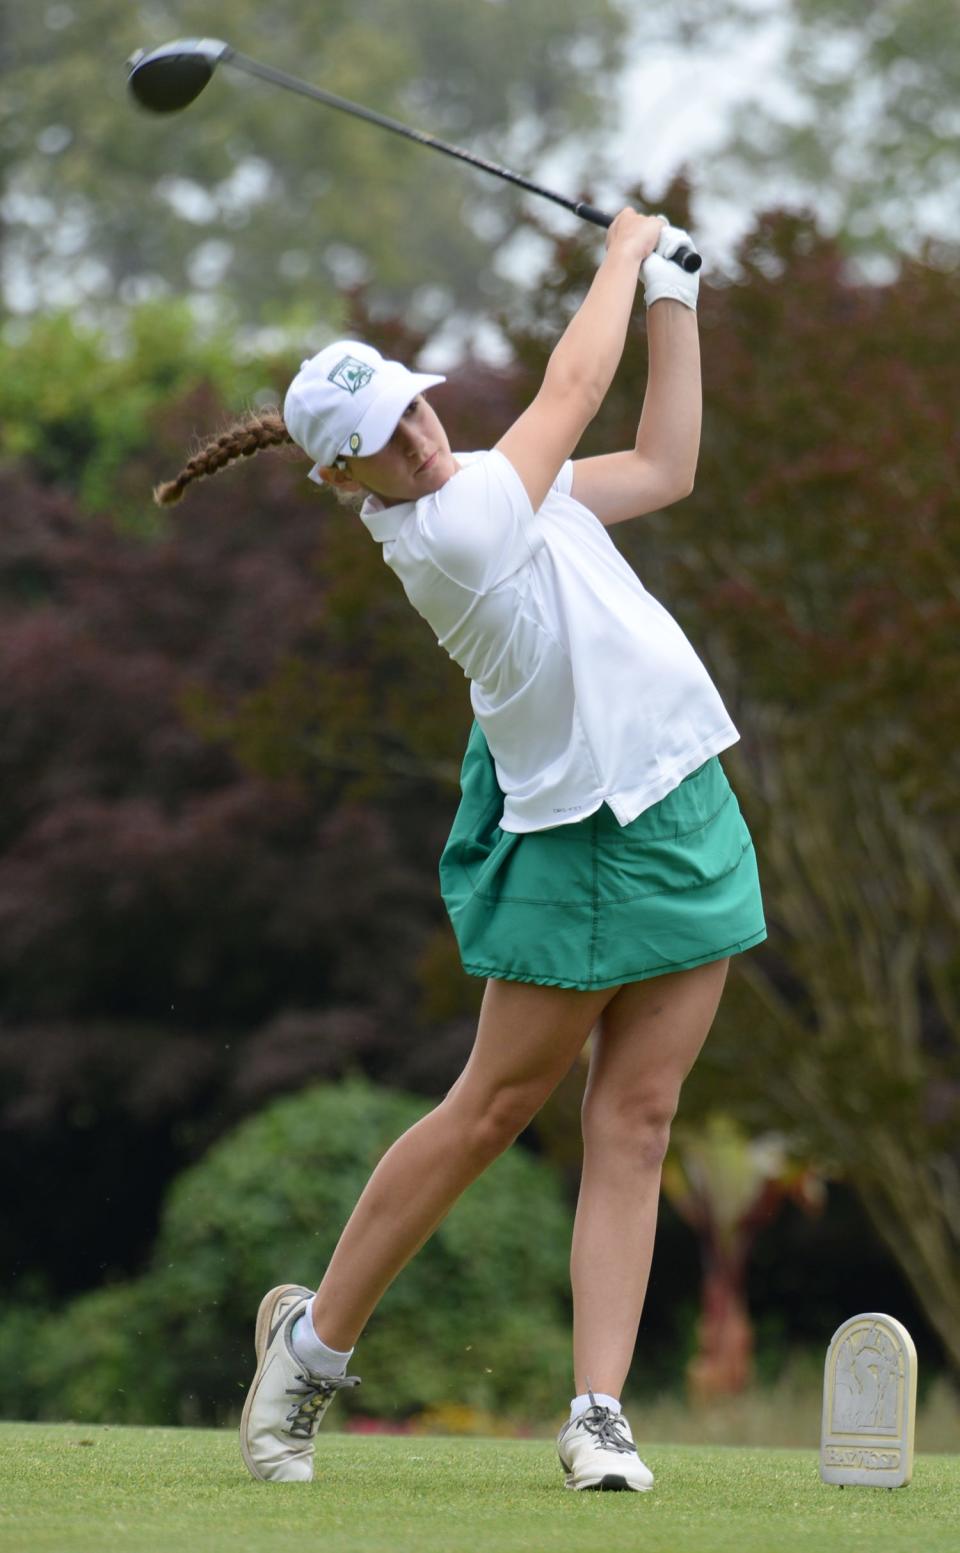 Meredith Finger's 1.7 handicap in nine-hole matches this spring ranks sixth statewide among both girls and boys. The sophomore has helped Archmere go 12-2 in team matches and earn the state's No. 1 ranking.